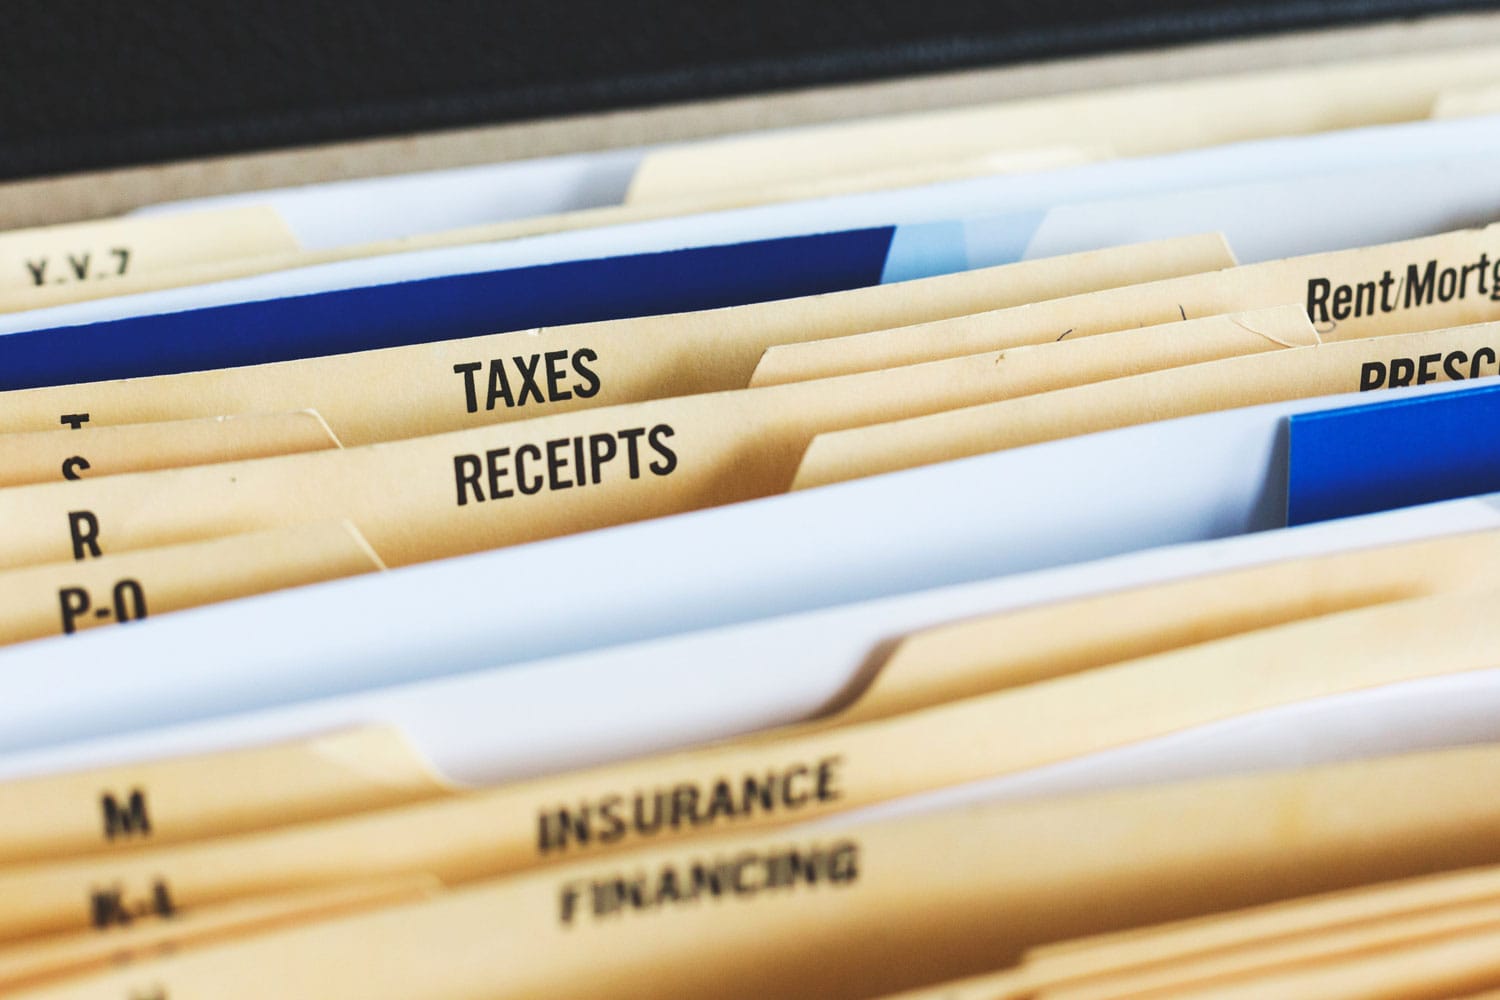 Folders for taxes, receipts, insurance, financing with documents inside them